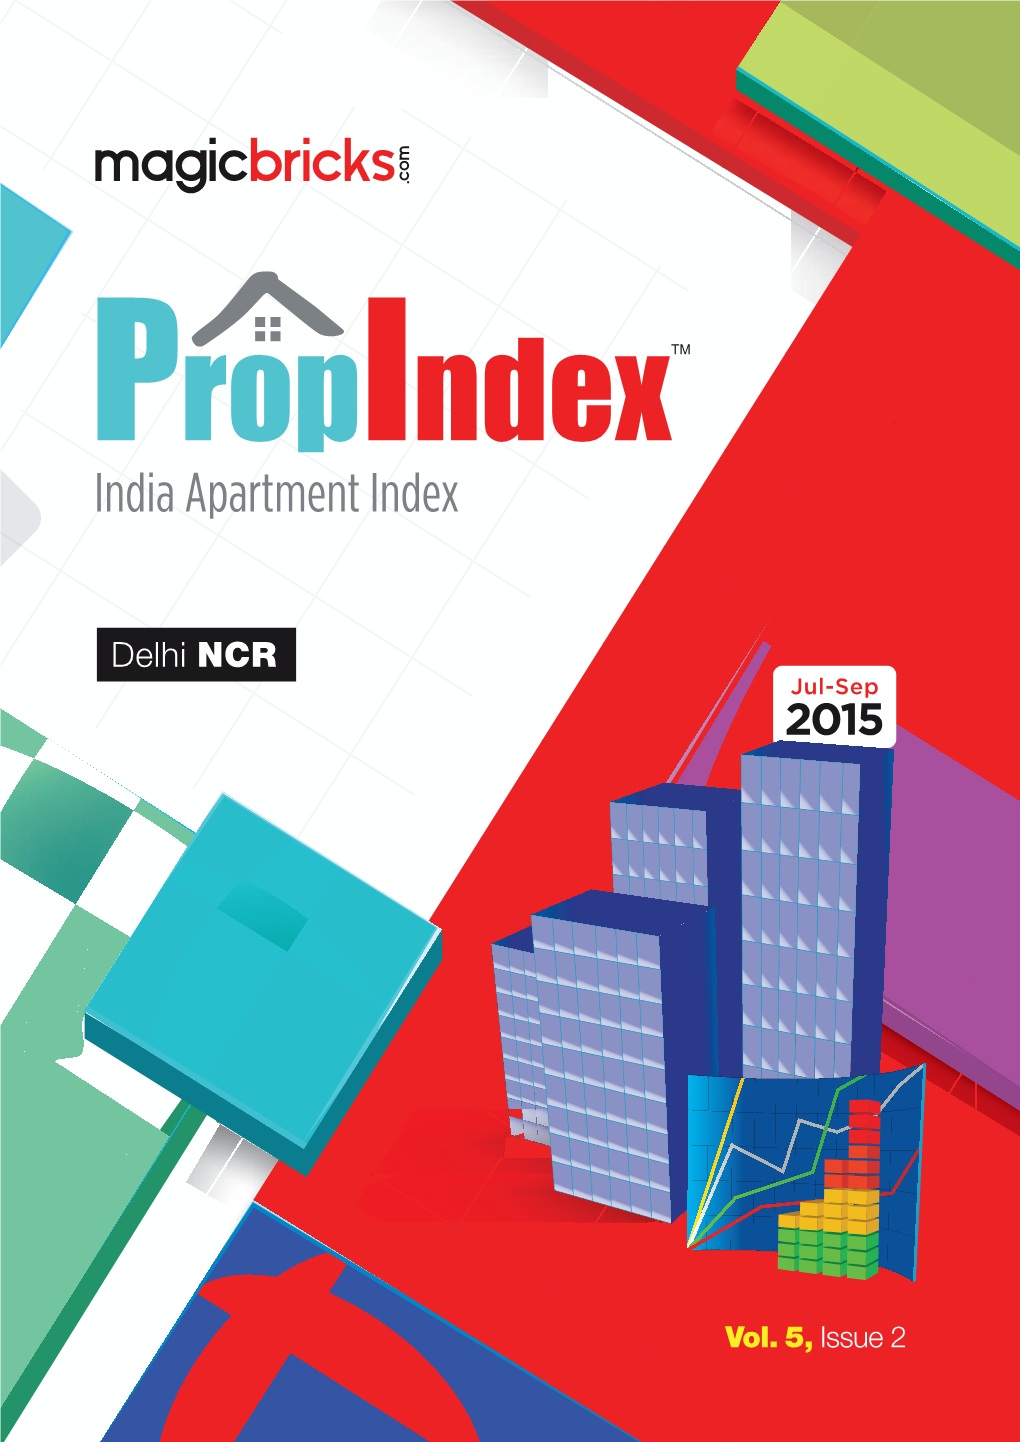 Jul-Sep 2015), We Look at the Price Trends Across Major Cities